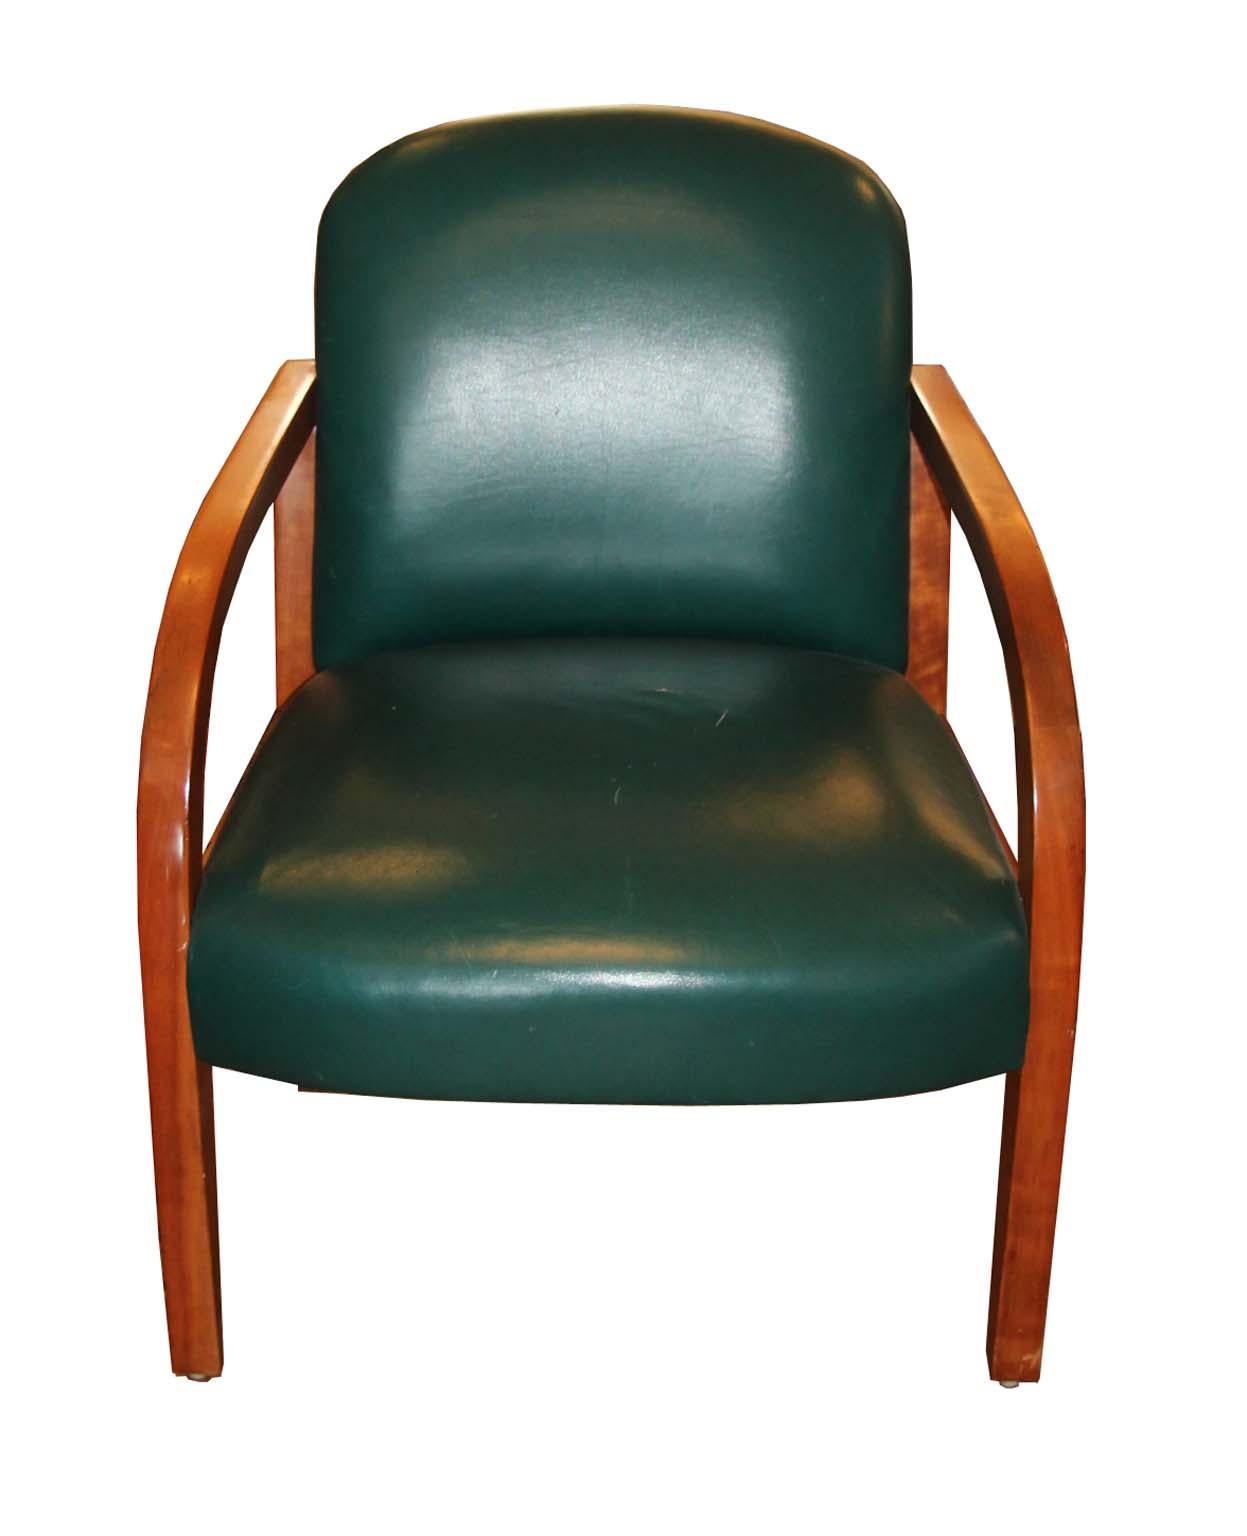 This pair of Donghia vintage armchairs in original green leather. The wood is solid maple, all joints are rock solid and built to last. The green leather has some wear but not structural damage or rips, see photos. Each chair is signed in two places